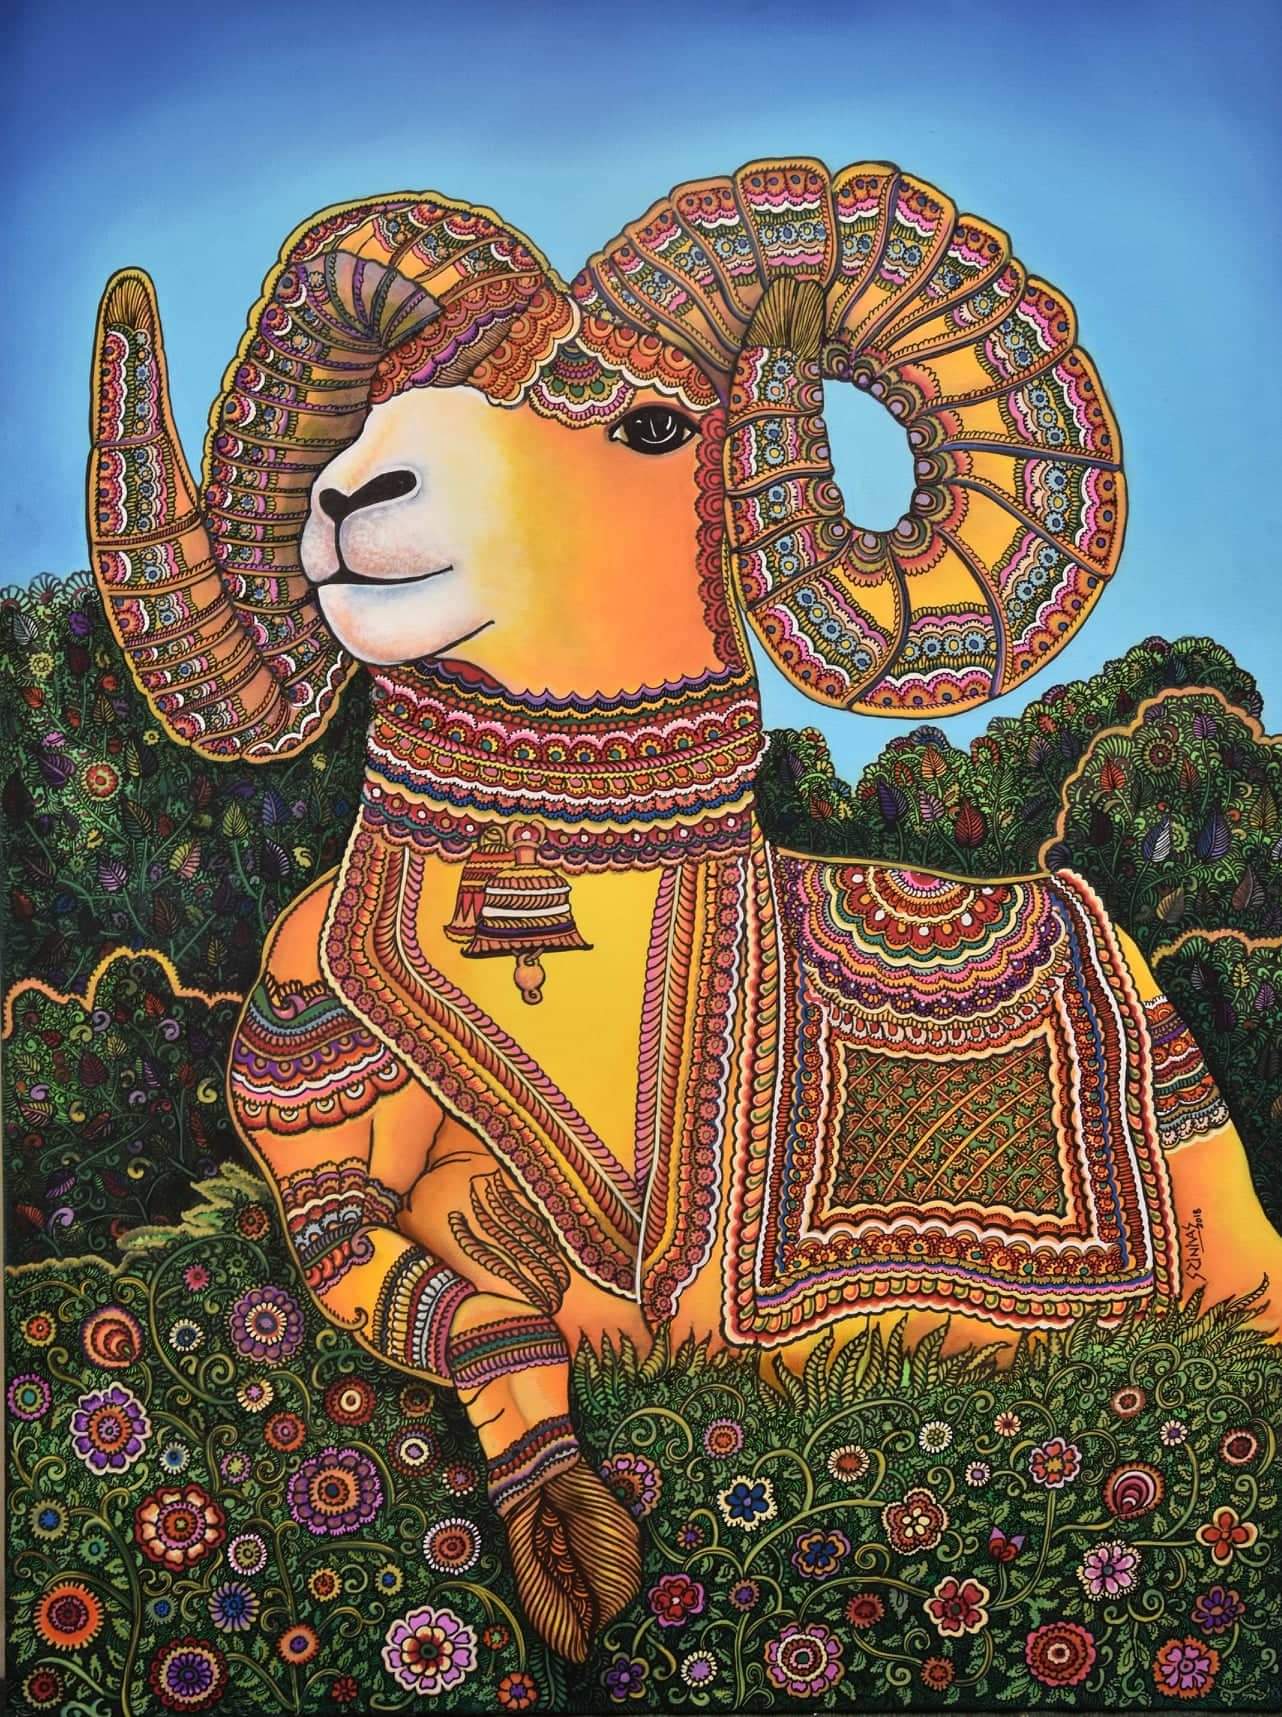 The Indian Ram